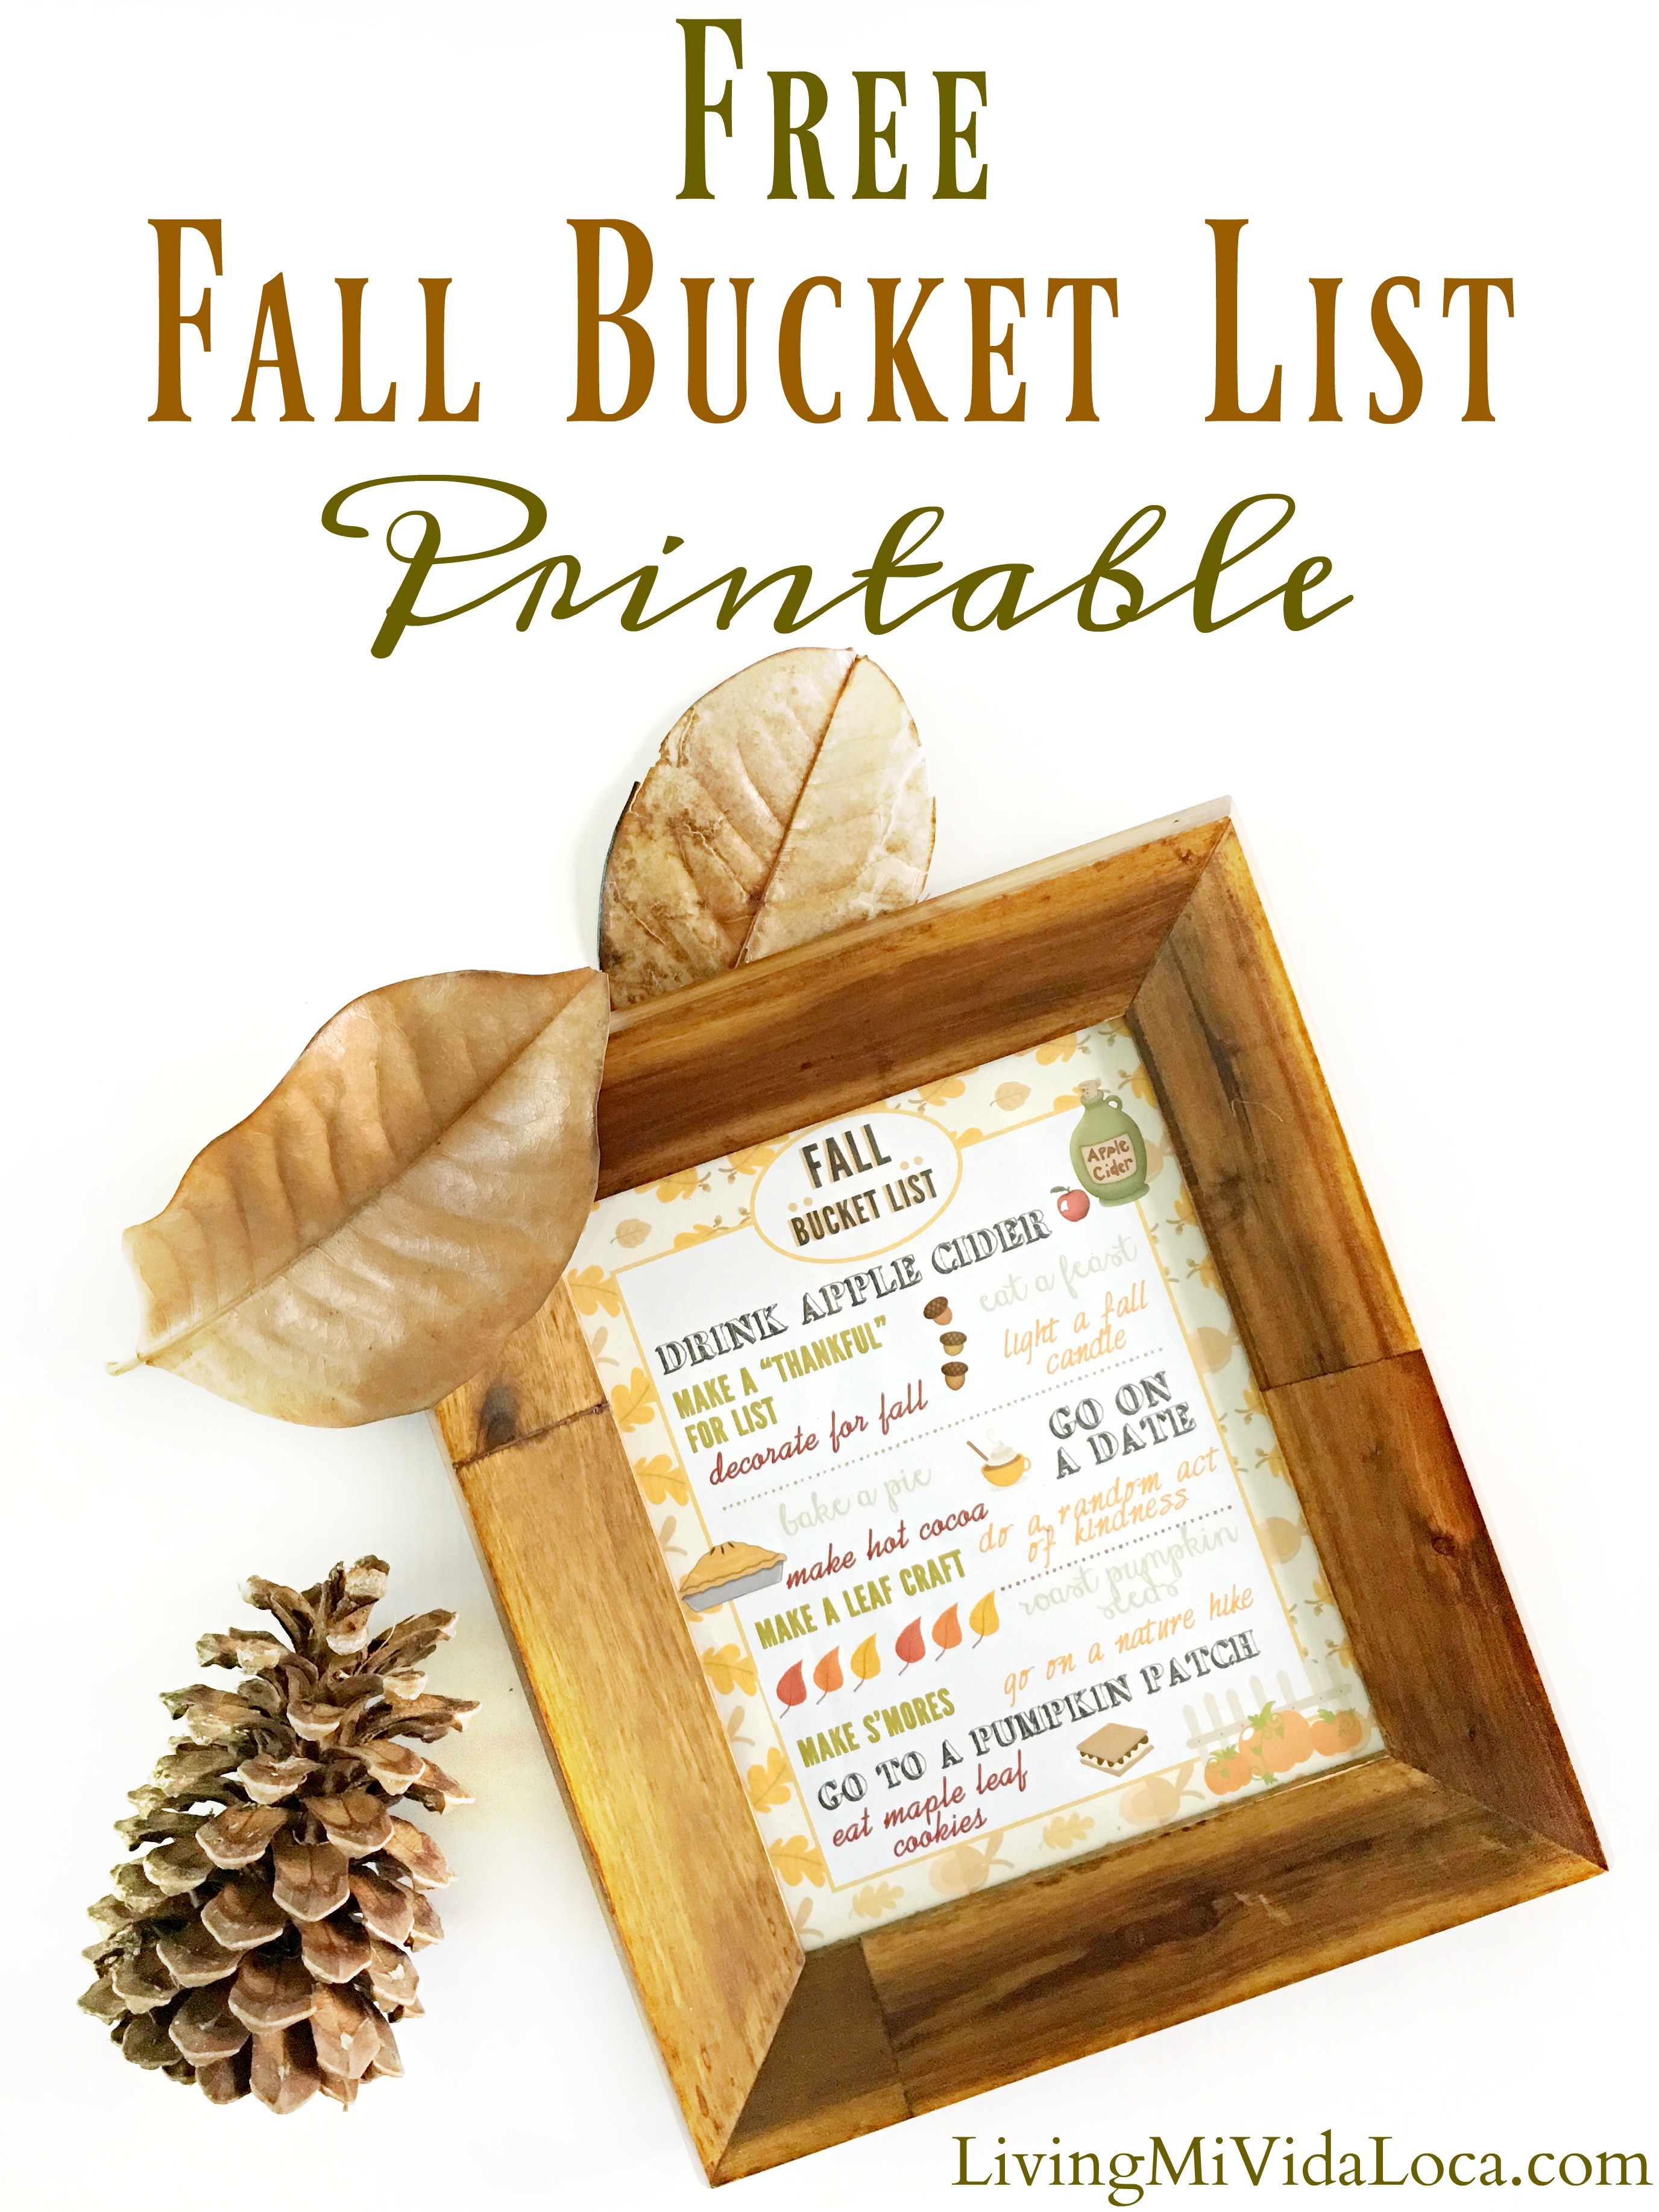 Fall activities list for families to do together. Celebrate Fall with this FREE Fall Bucket List printable! This fall printable looks great printed on cardstock, or even just plain white paper. We printed ours and put it in an 8×10 frame (we did have to trim it a bit since it was printed on 8.5×11 paper). It’s our first fall decoration of the year!  livingmividaloca.com  #fall #falldecorations #fallprintable #thingstodoinfall #falldecor #decoratingforfall #diyfalldecor #easyfalldecor